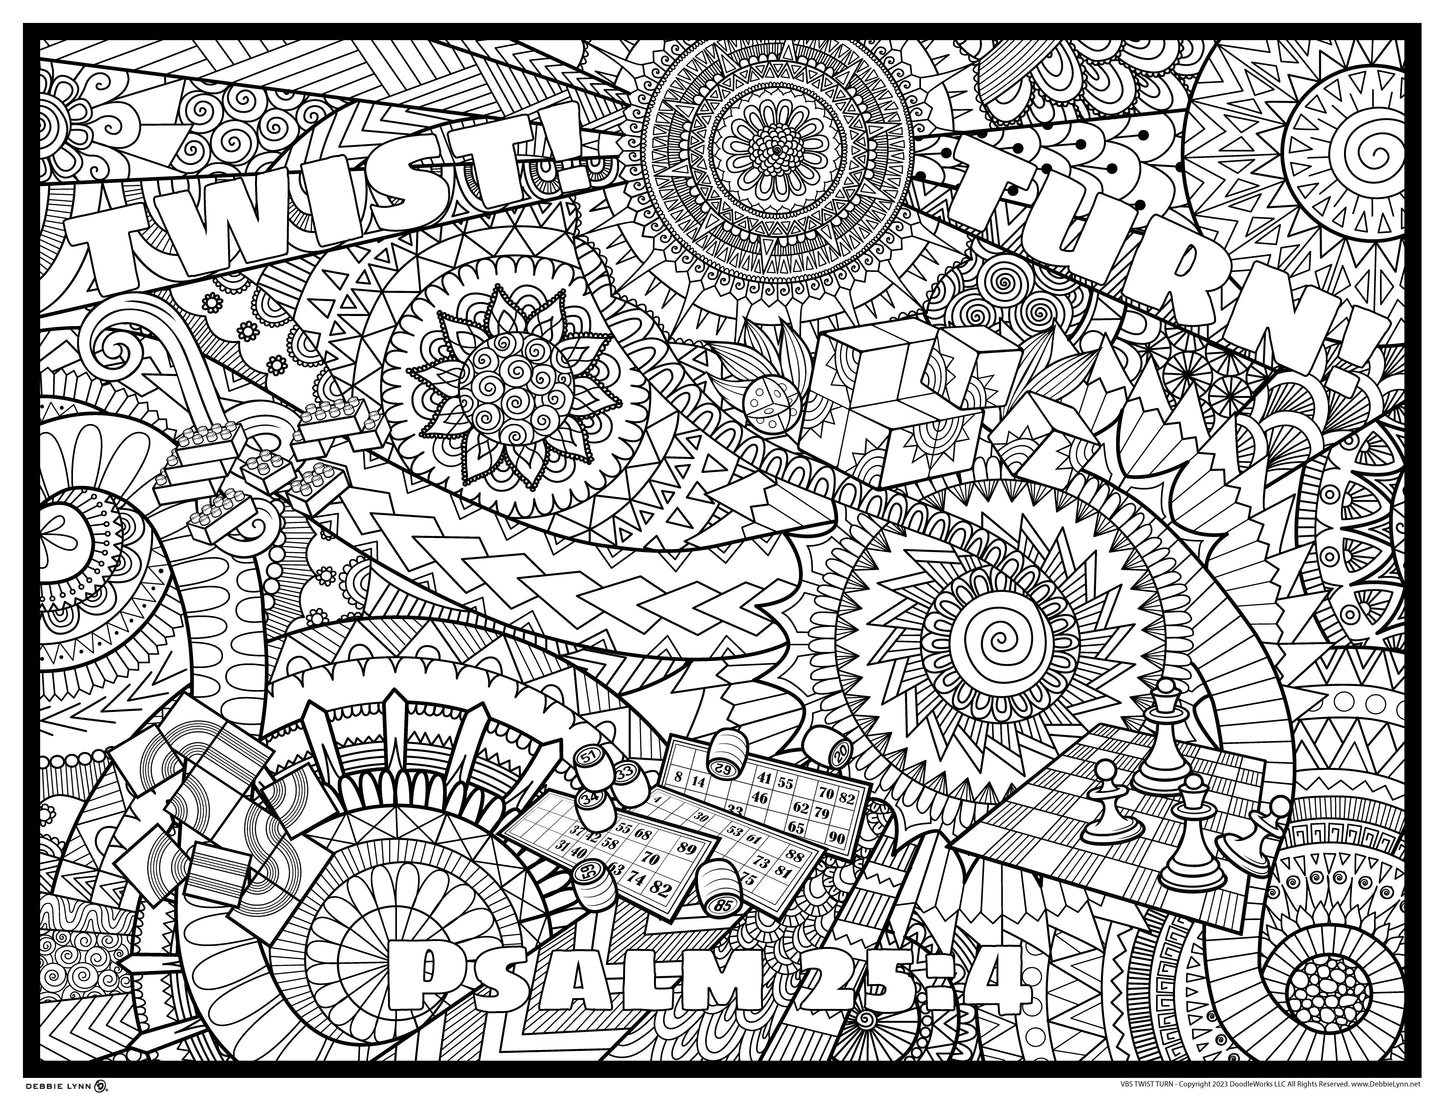 TWIST TURN VBS FAITH PERSONALIZED GIANT COLORING POSTER 46"x60"